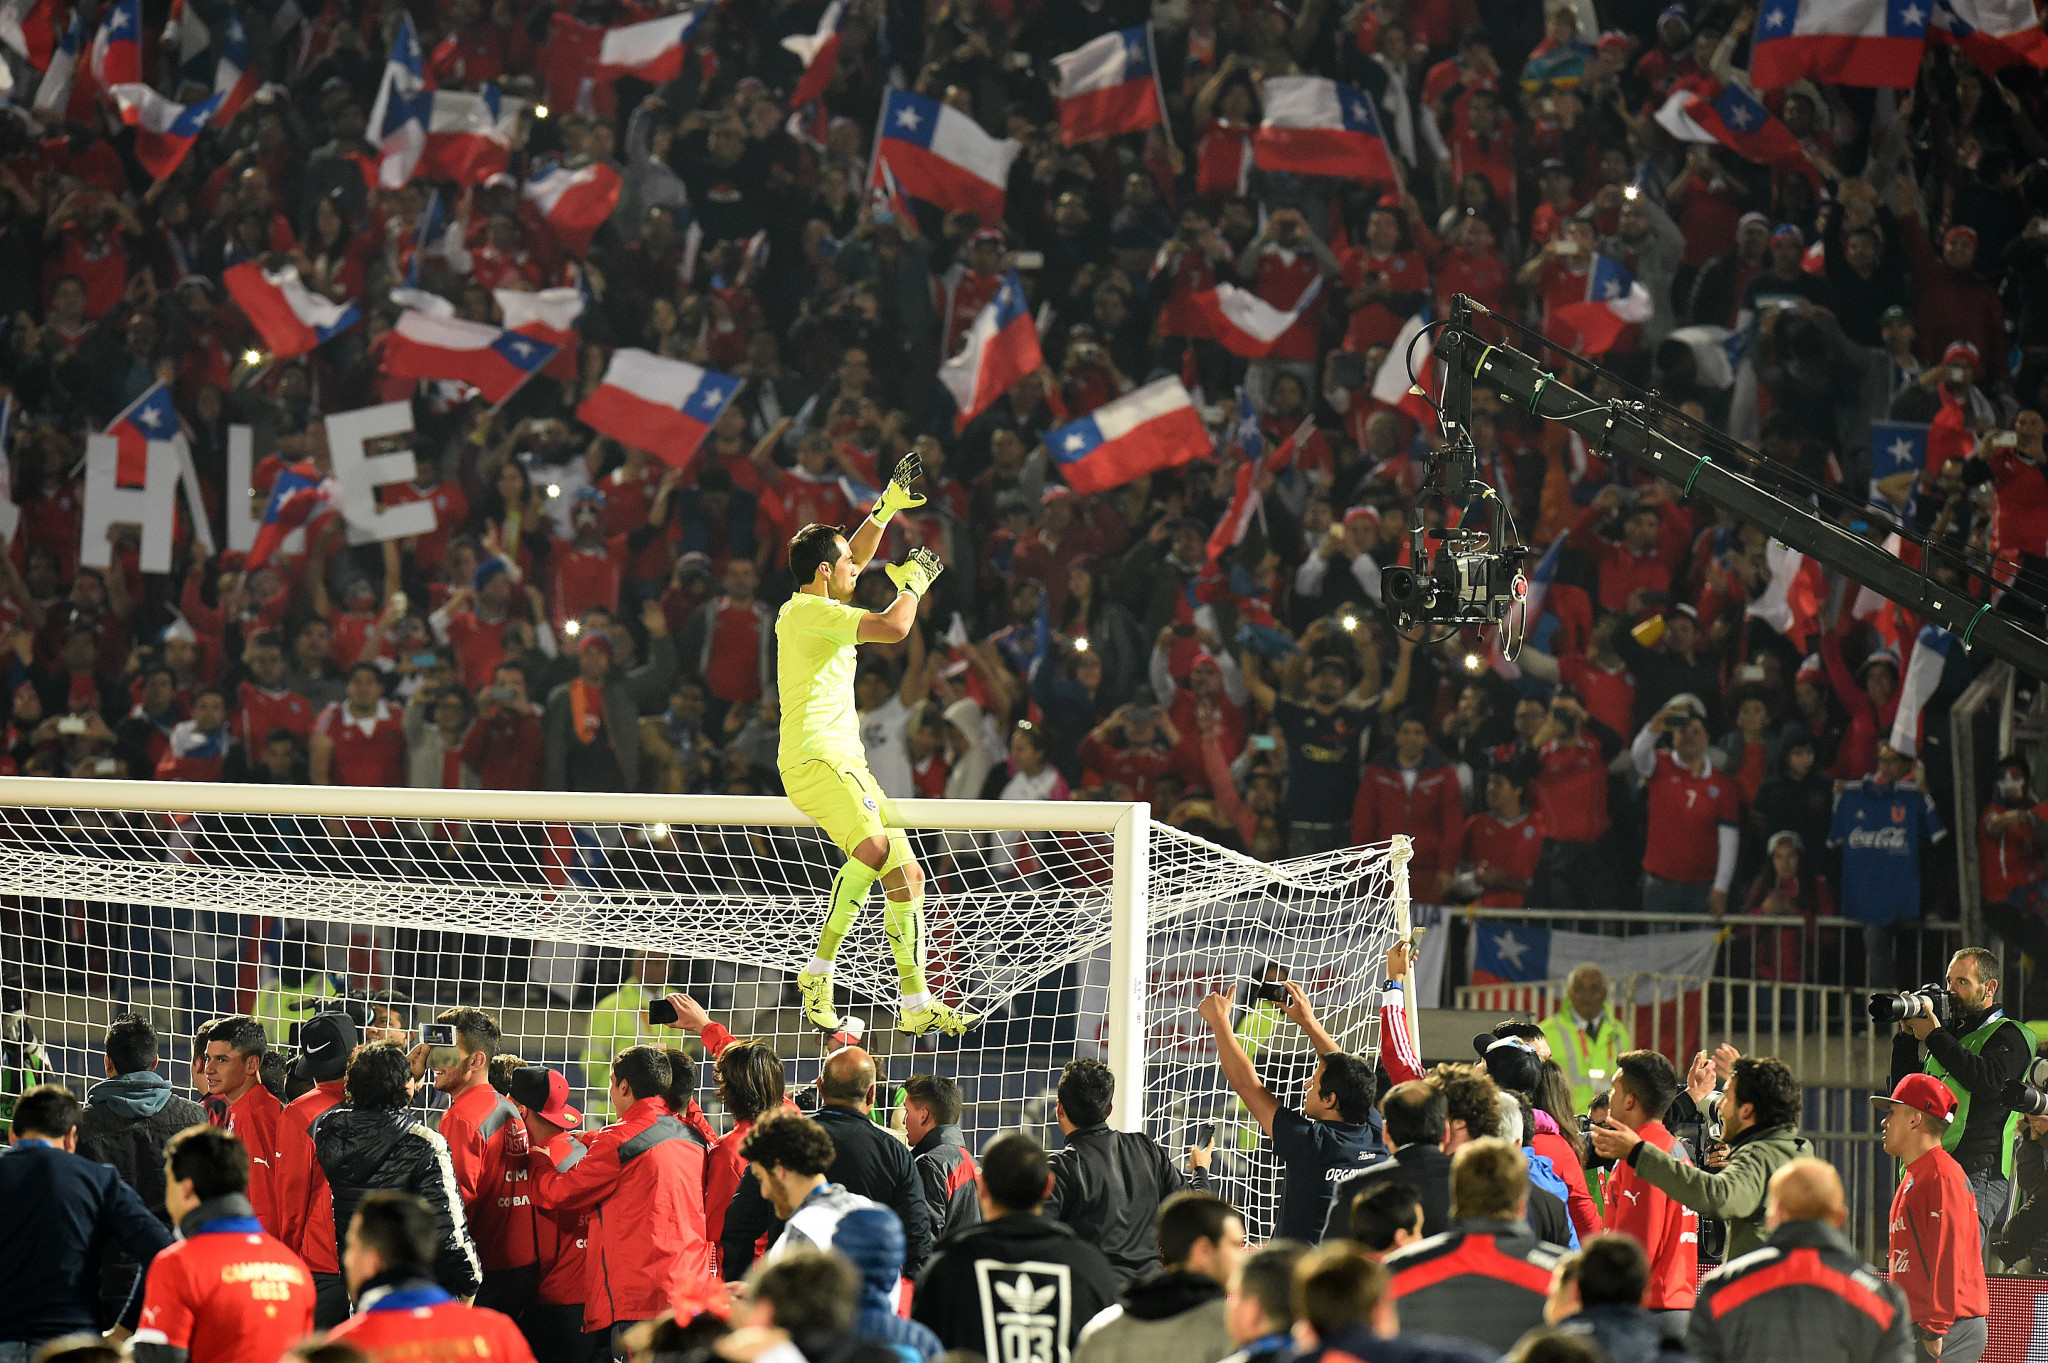 Chile won consecutive Copa America title in 2015 and 2016 before failing to reach the next World Cup ©Getty Images